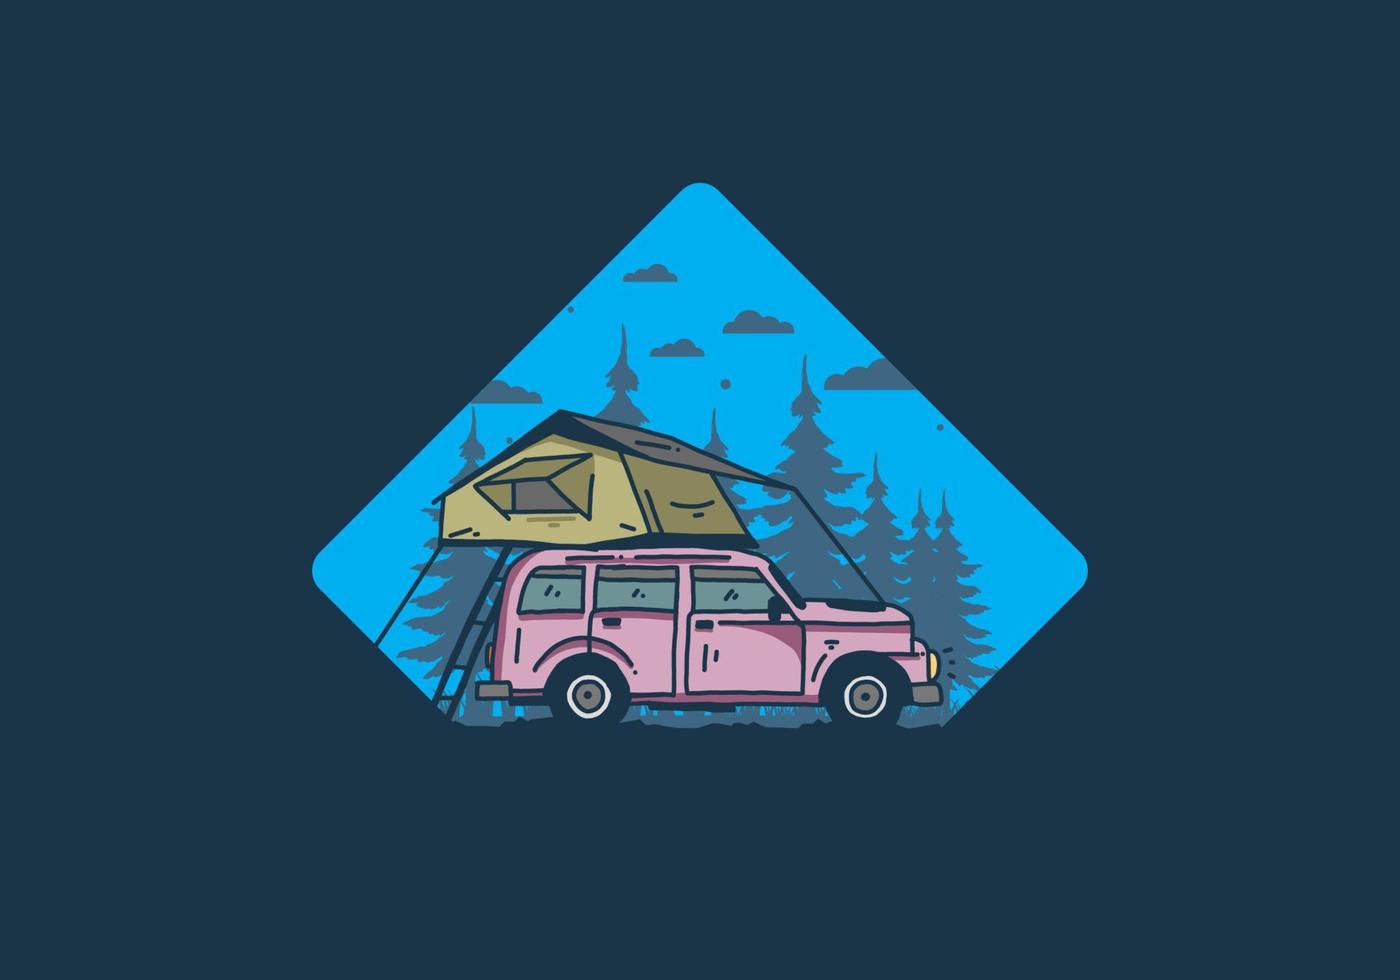 Camping on the roof of the car illustration vector